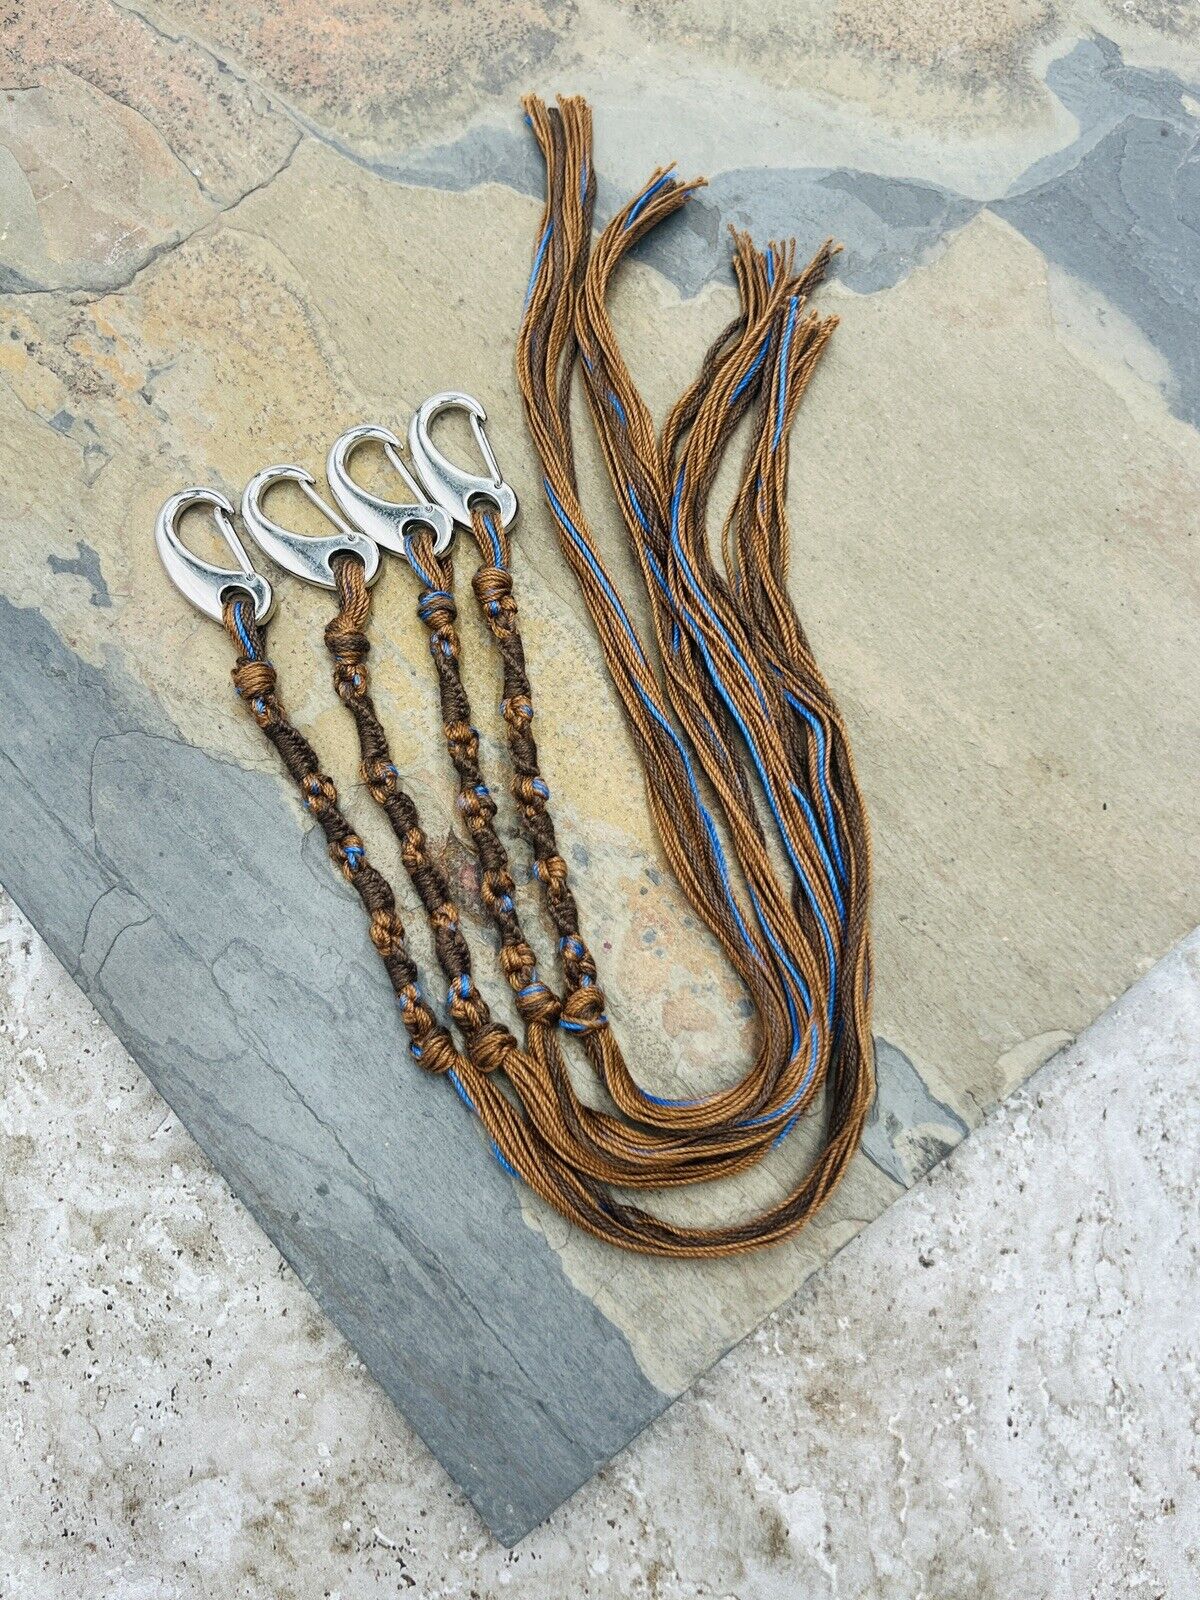 TZITZIT W/Clips Browns With hidden Blue, On Clips, Details In Description